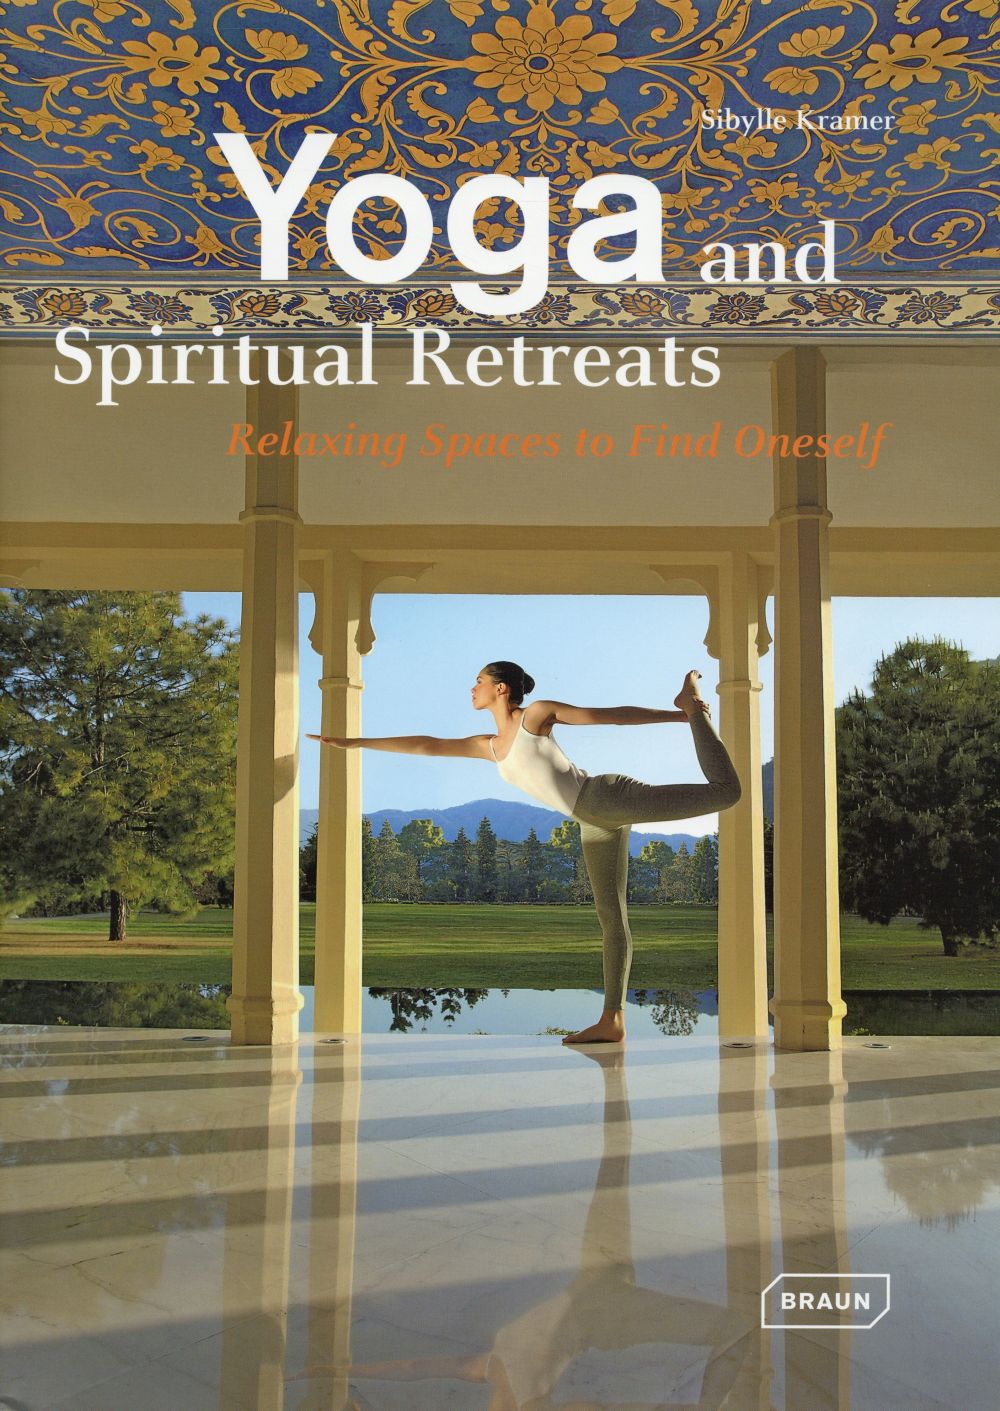 YOGA AND SPIRITUAL RETREATS - RELAXING SPACES TO FIND ONESELF.